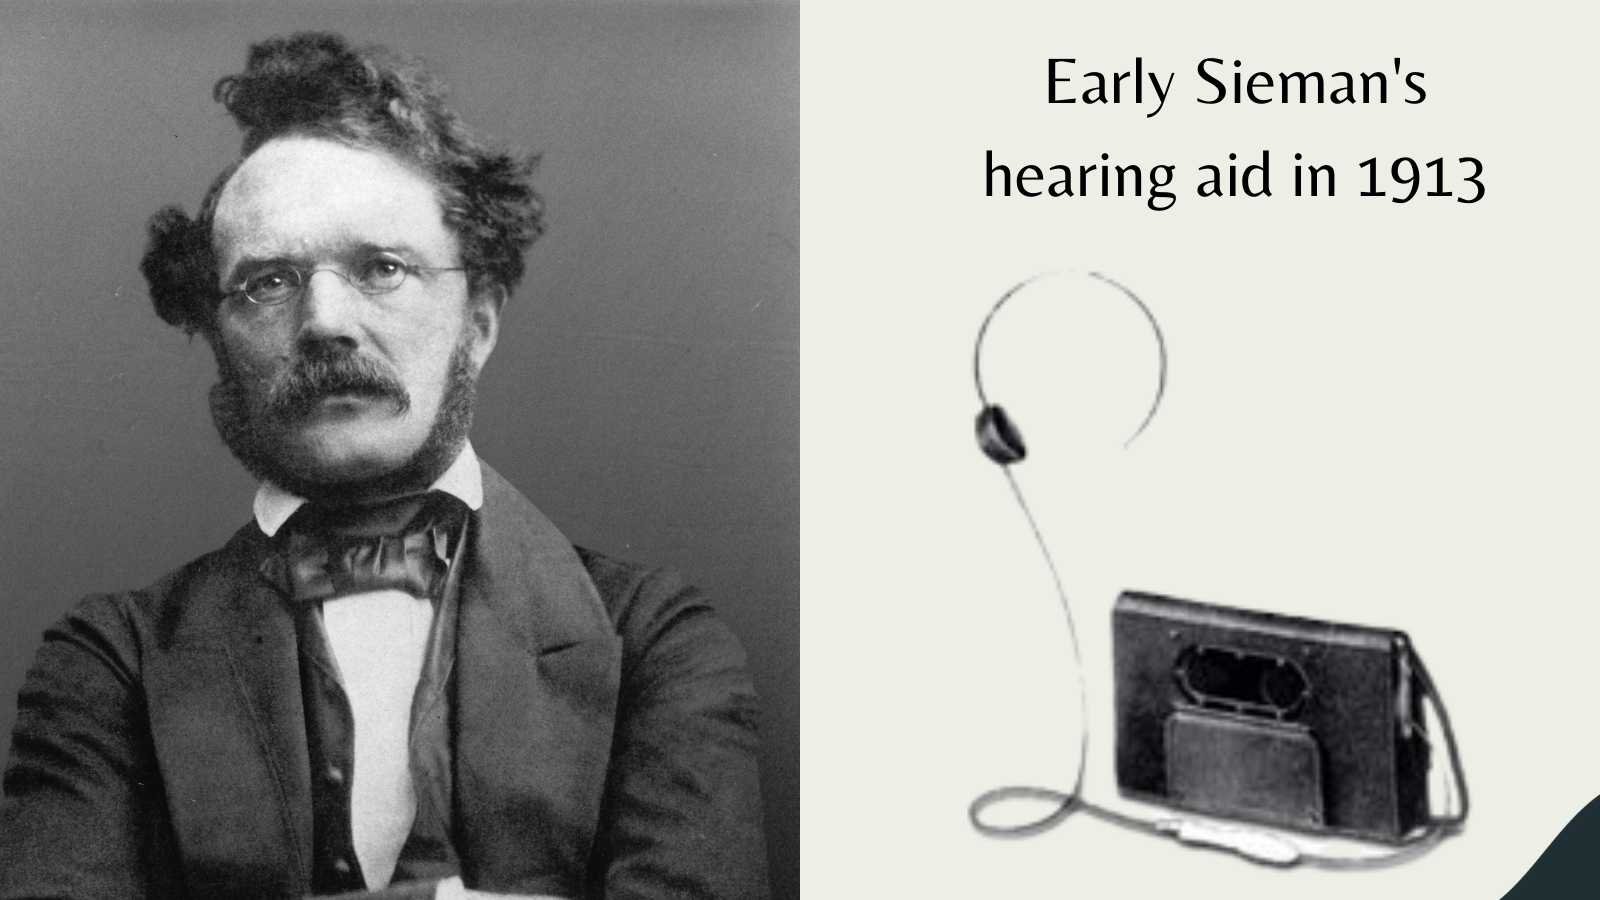 First Sieman's hearing aid and Sieman's founder